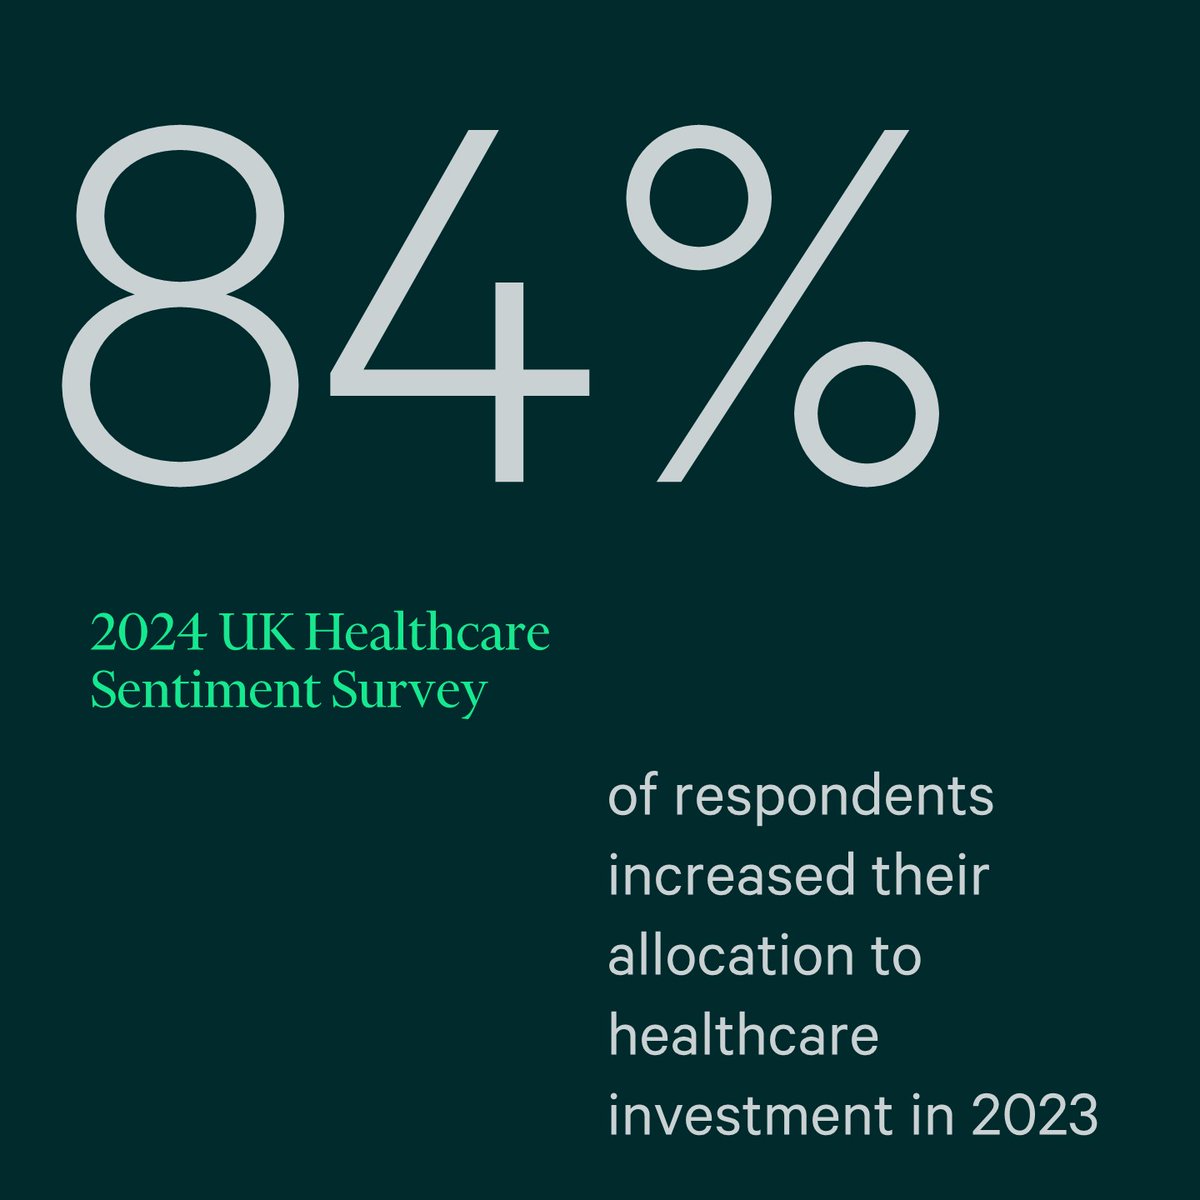 #Healthcare investment not only offers investors favourable financial returns but can also lead to improved social outcomes. Learn why investor appetite for the healthcare sector is strong in our 2024 UK Healthcare Sentiment Survey: cbre.co/44lJz74 #Investment